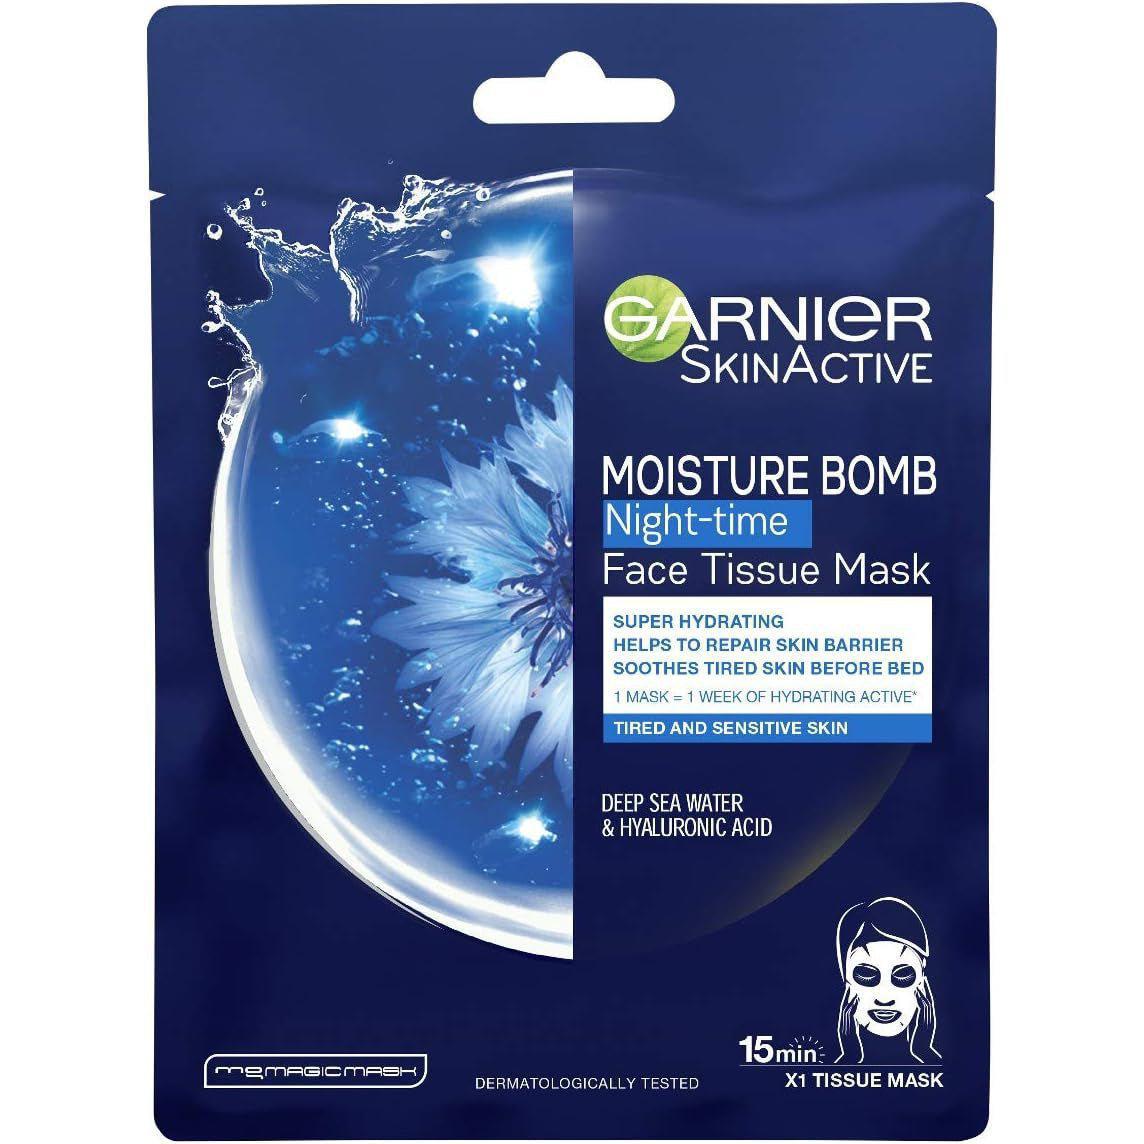 Garnier Moisture Bomb Night-Time Deep Sea Water and Hyaluronic Acid Sheet Mask, 28g - Healthxpress.ie